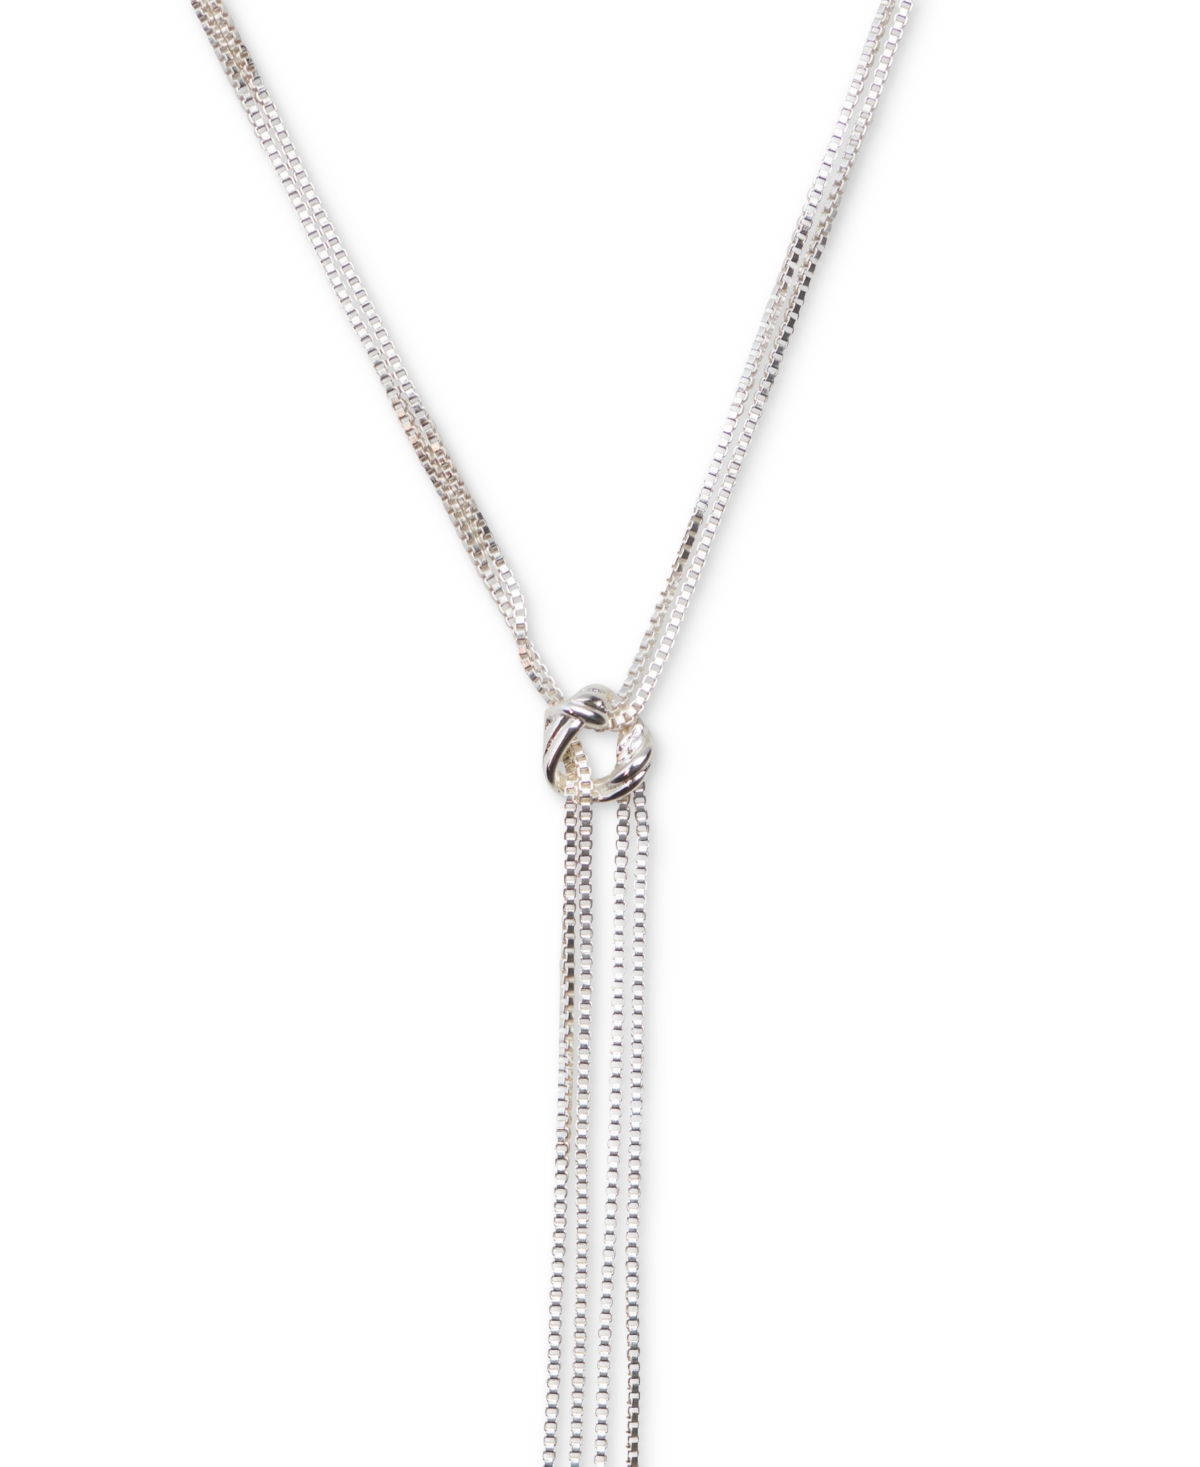 Shop Lucky Brand Silver-tone Knotted Lariat Necklace, 17" + 3" Extender